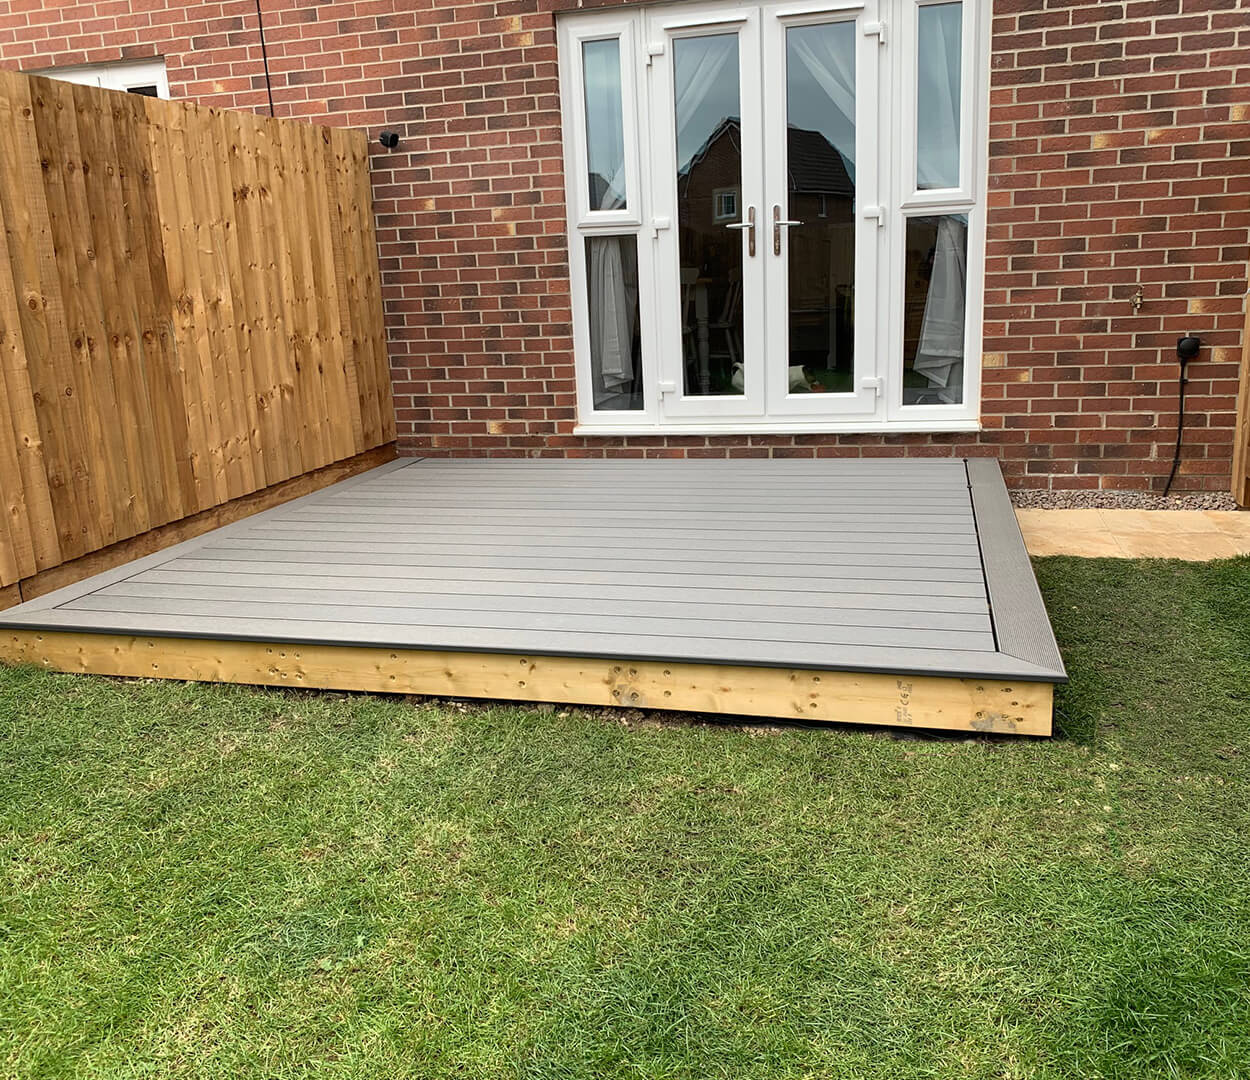 Stone grey composite decking area with dining table and bullnose edge